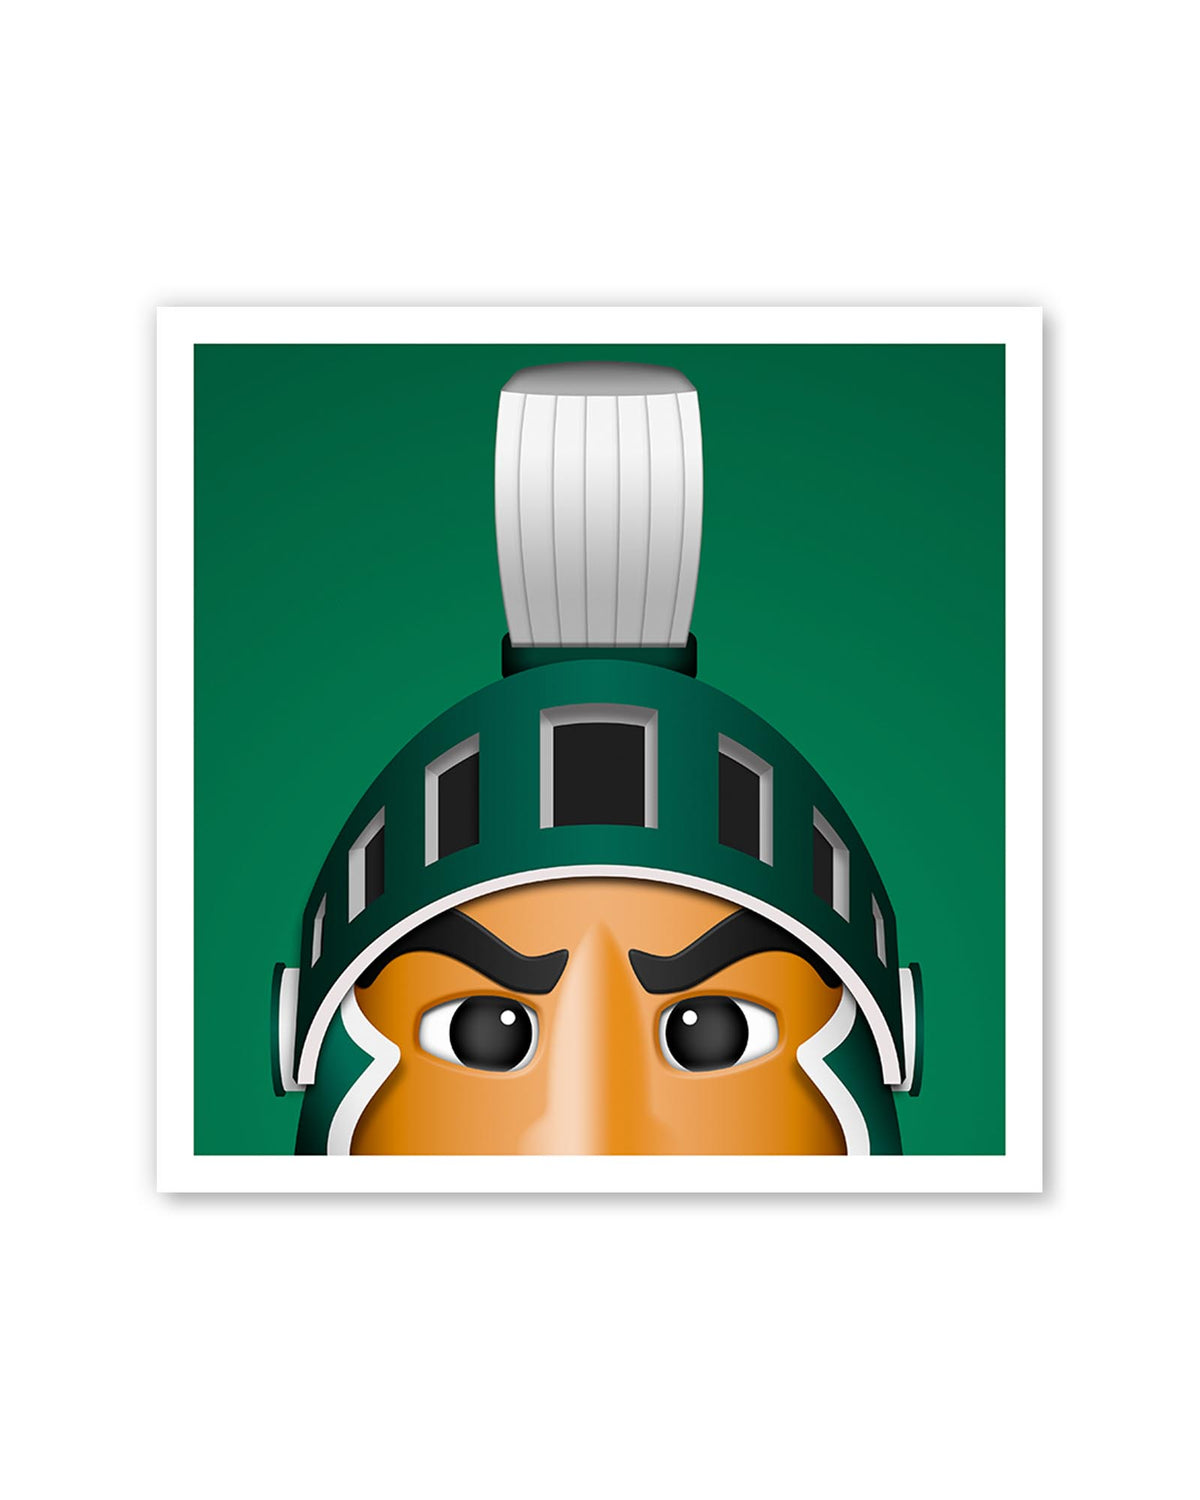 Minimalist Sparty Square Poster Print